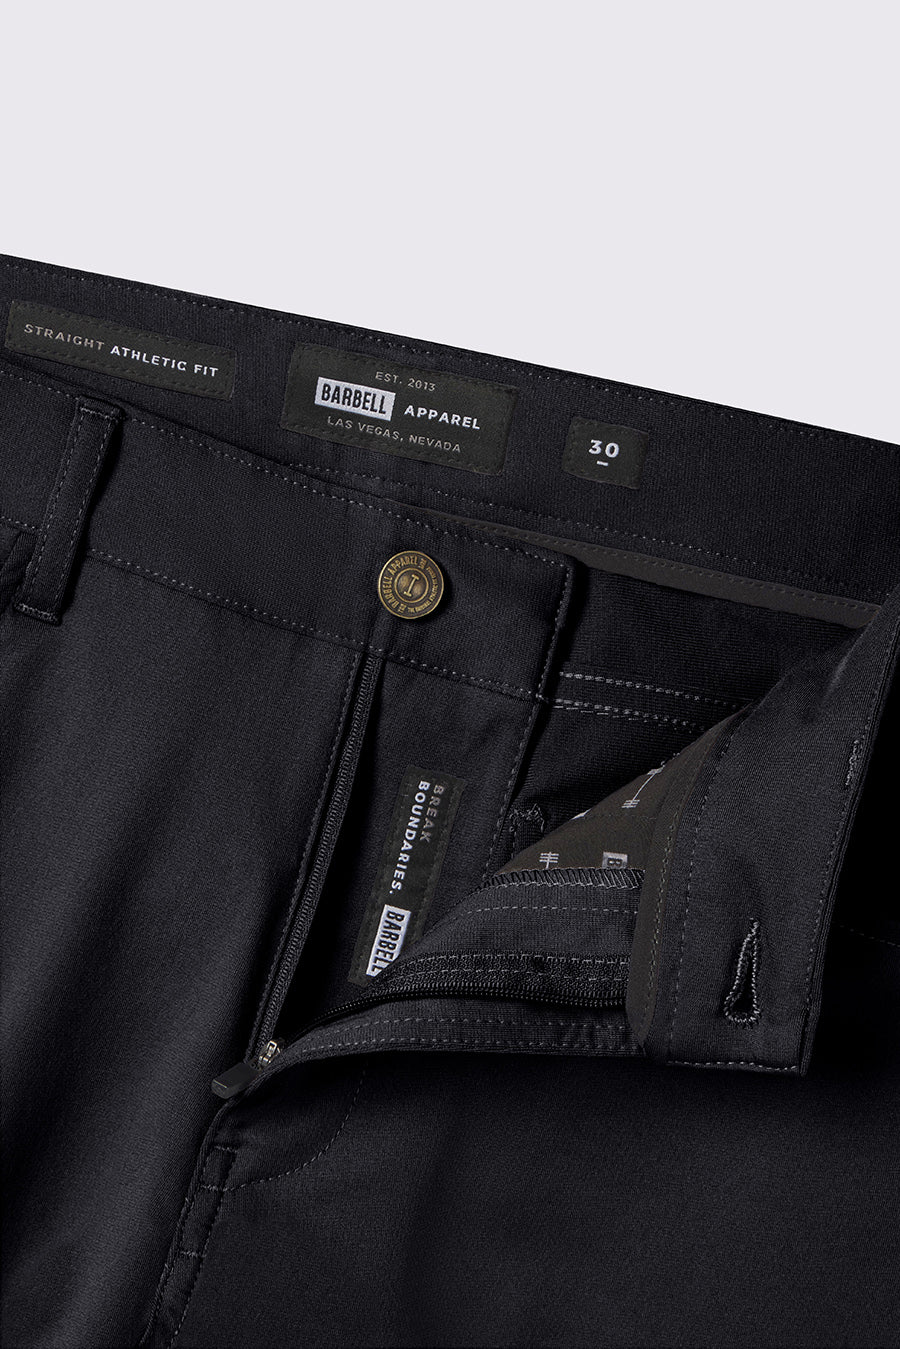 Anything Dress Pant - Black - photo from front button detail #color_black